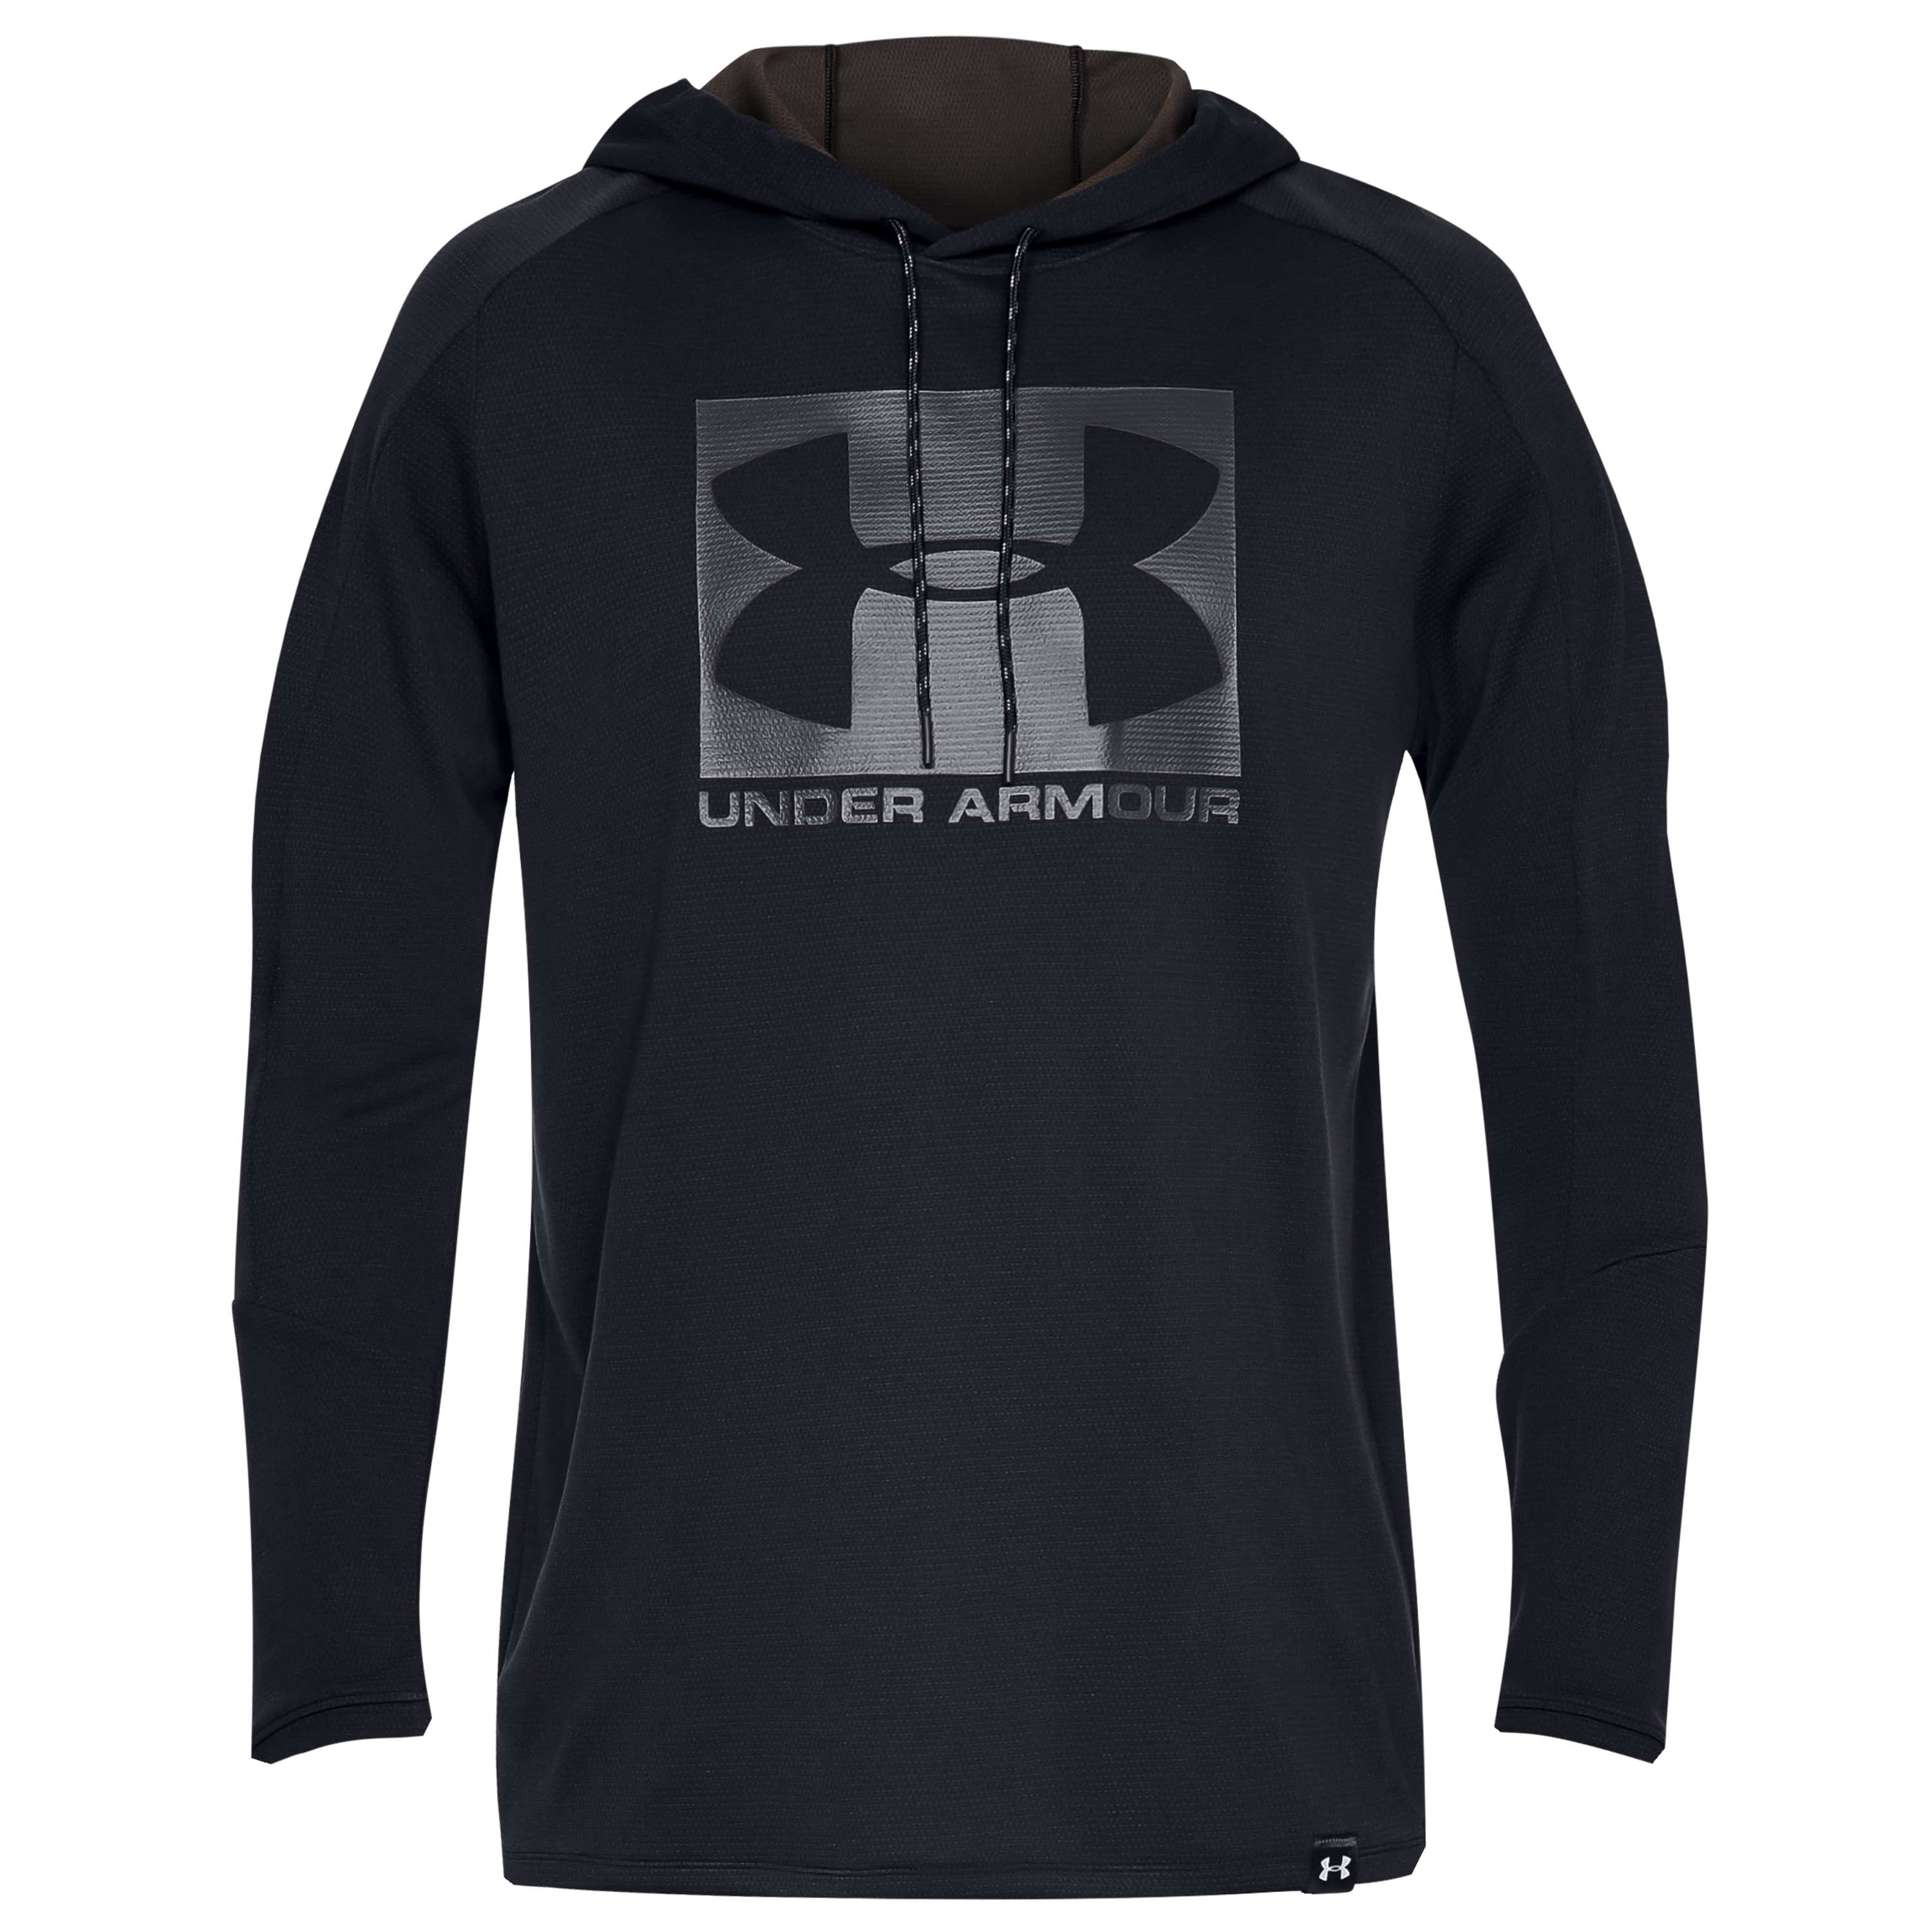 Purchase the Under Armour Hoodie Lighter Longer black by ASMC